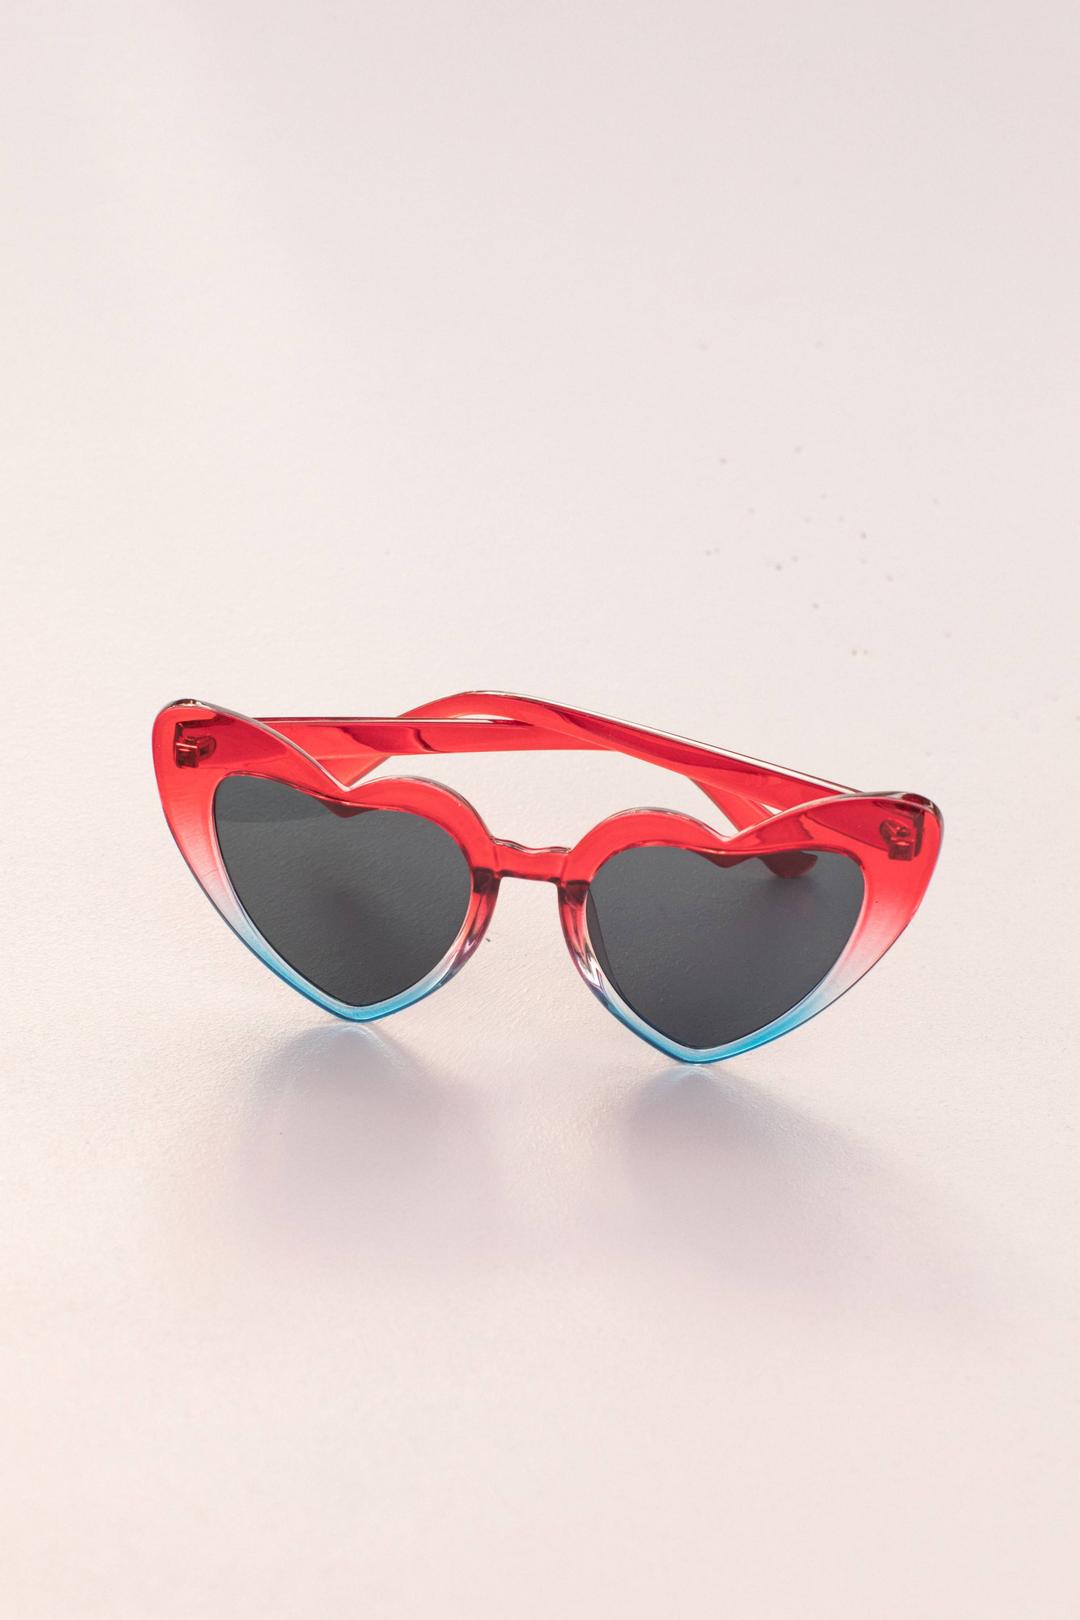 July 4 Fourth of July Heart Sunglasses